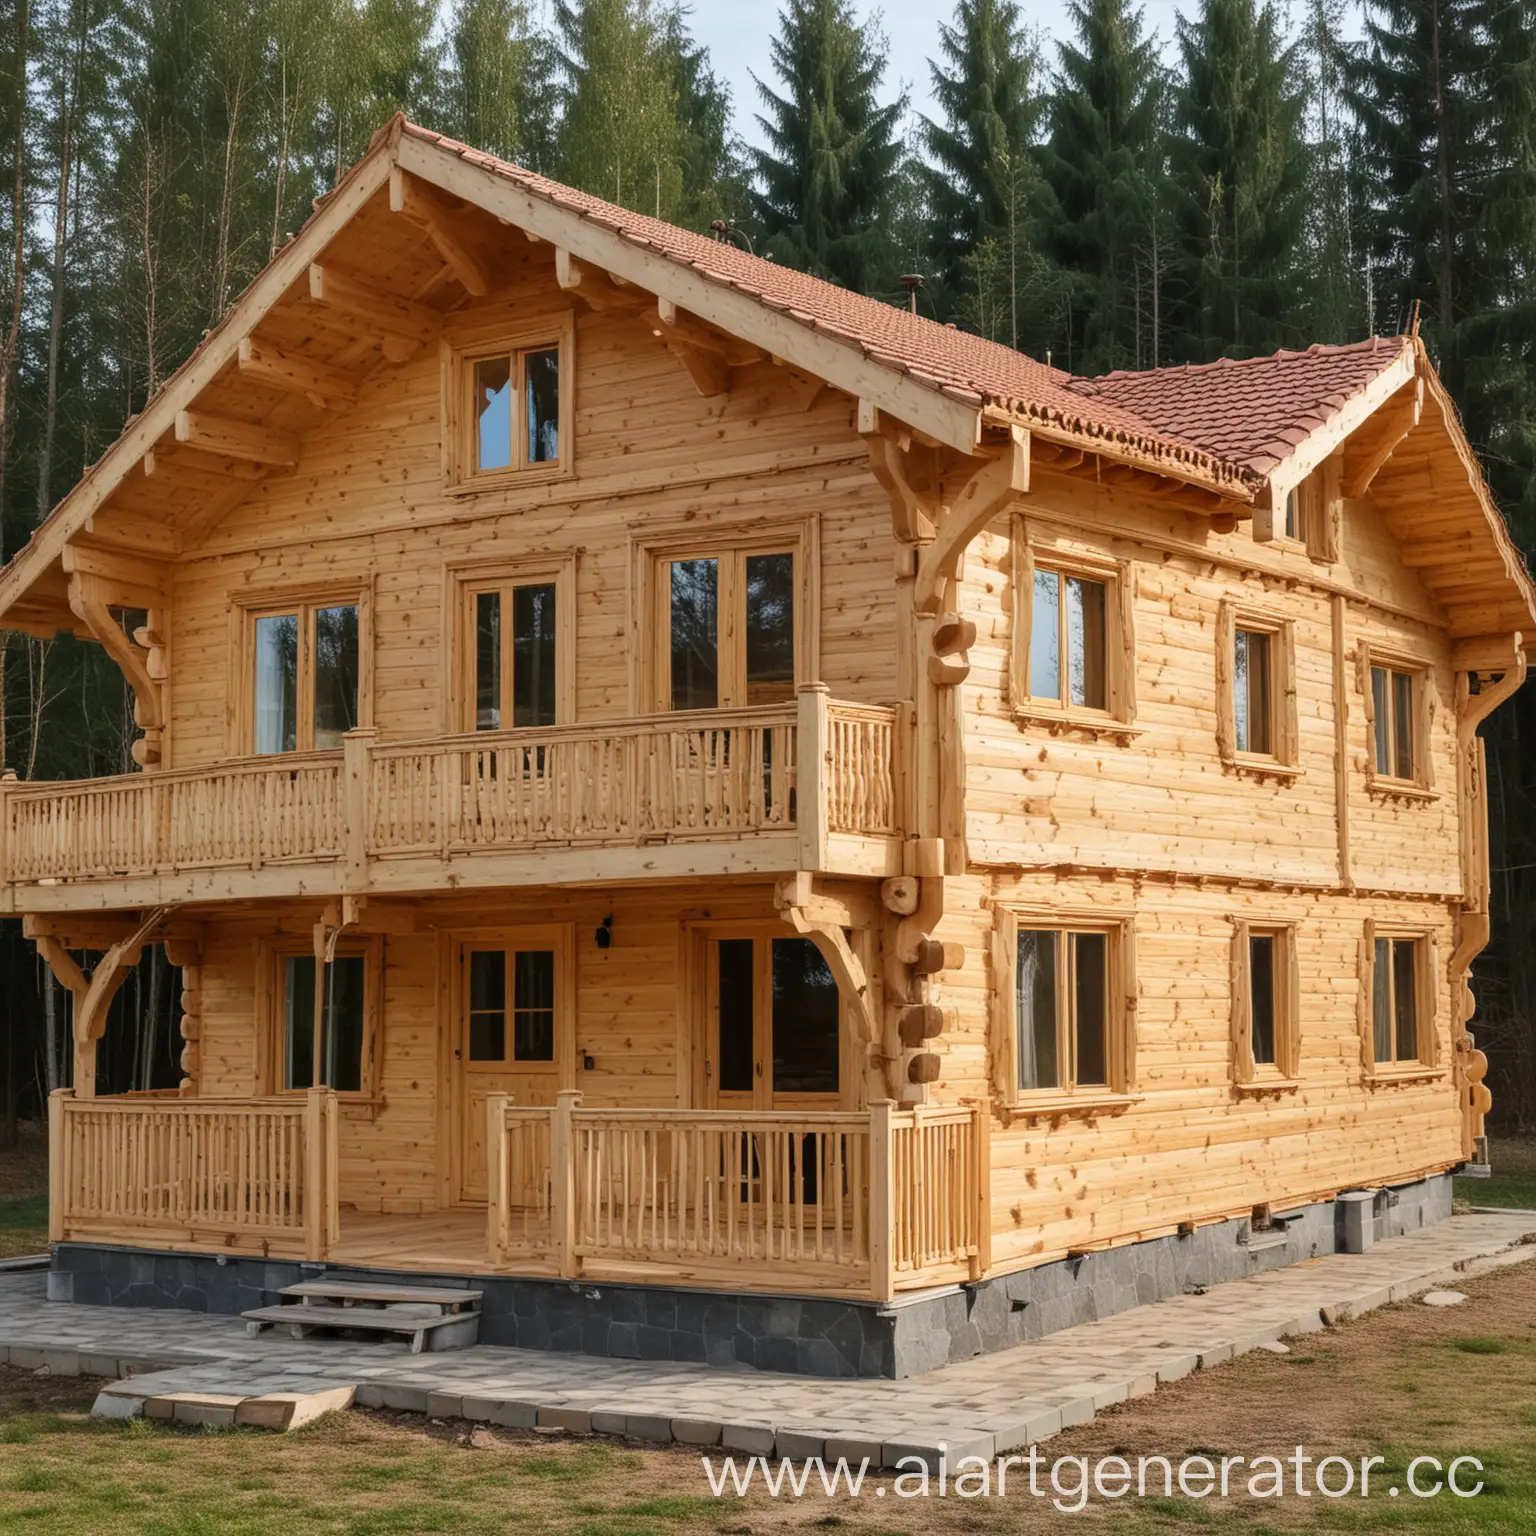 Rustic-Wooden-House-Crafted-from-Profiled-Lumber